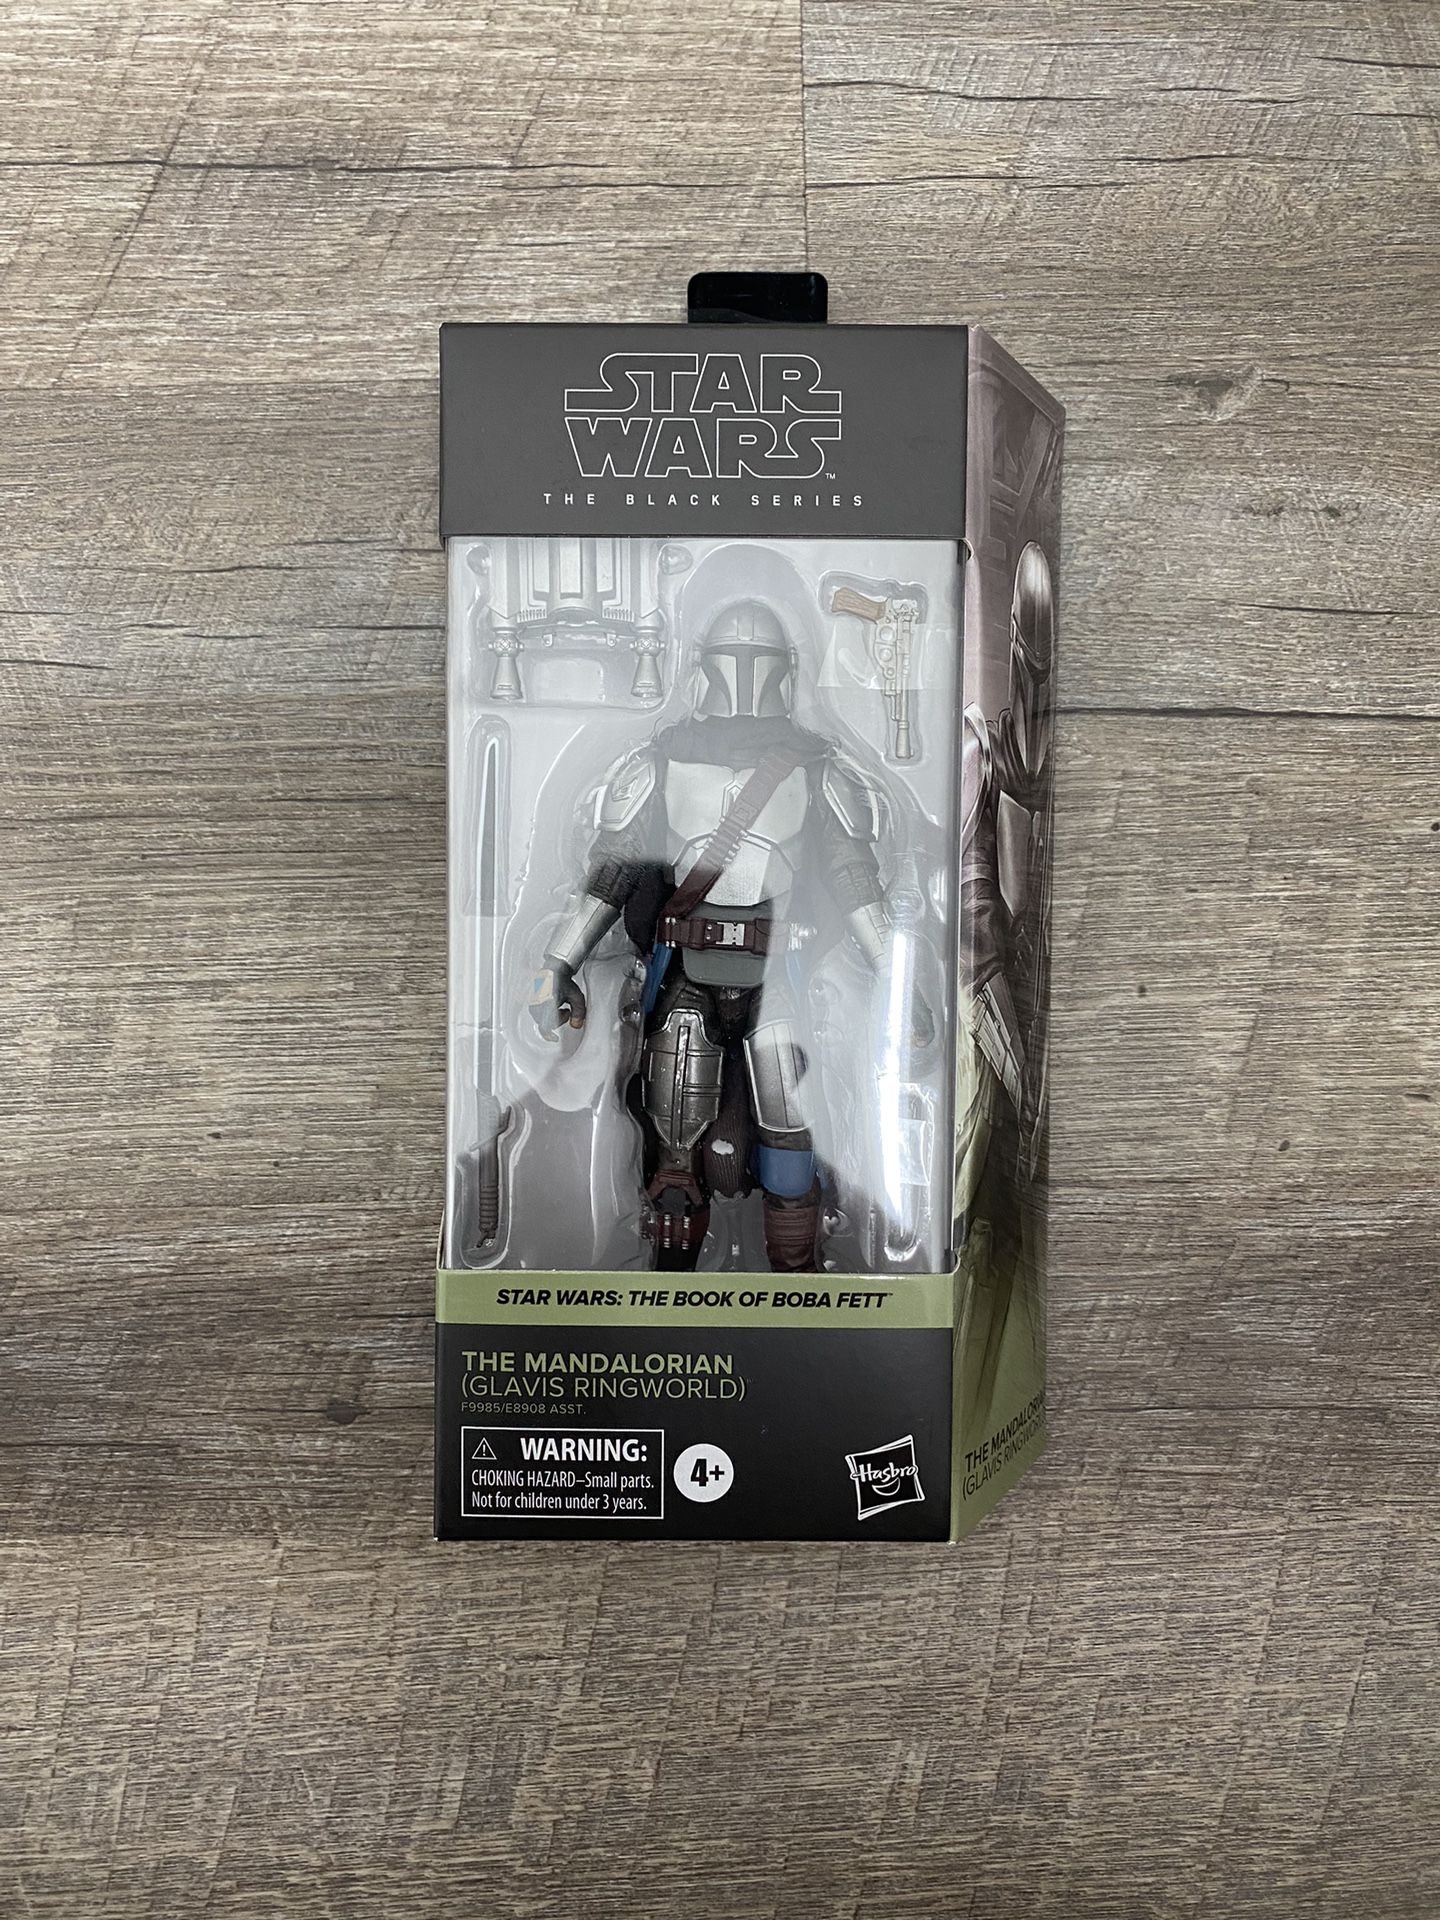 In Hand, Brand New, Never Opened Star Wars The Black Series The Mandalorian (Glavis Ringworld) 6-Inch Action Figure